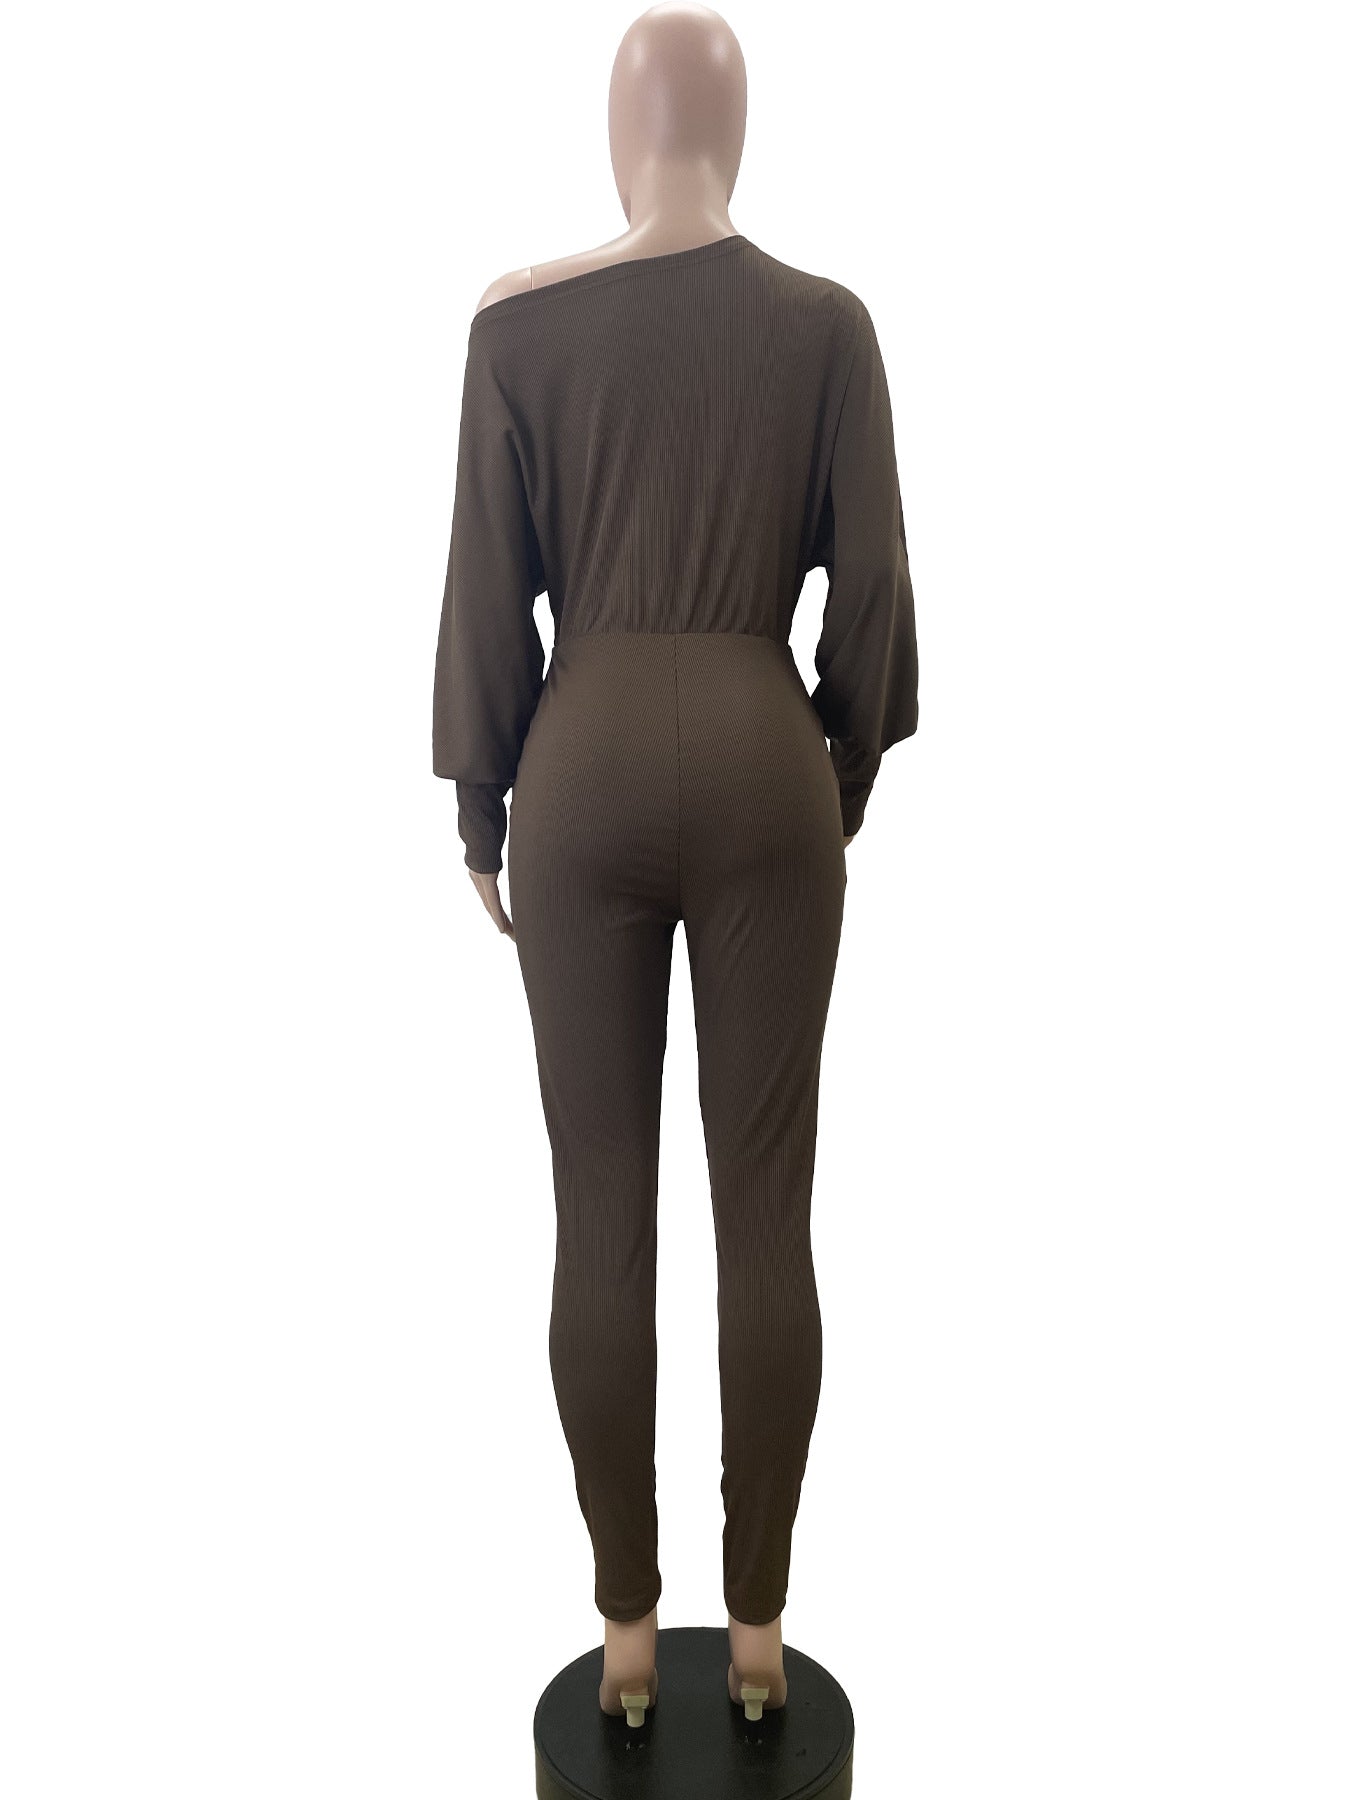 BamBam Women's Autumn And Winter Solid Color Slim Fit Fashion Cocktail Fancy Ladies Long Sleeve Tight Fitting Jumpsuit - BamBam Clothing